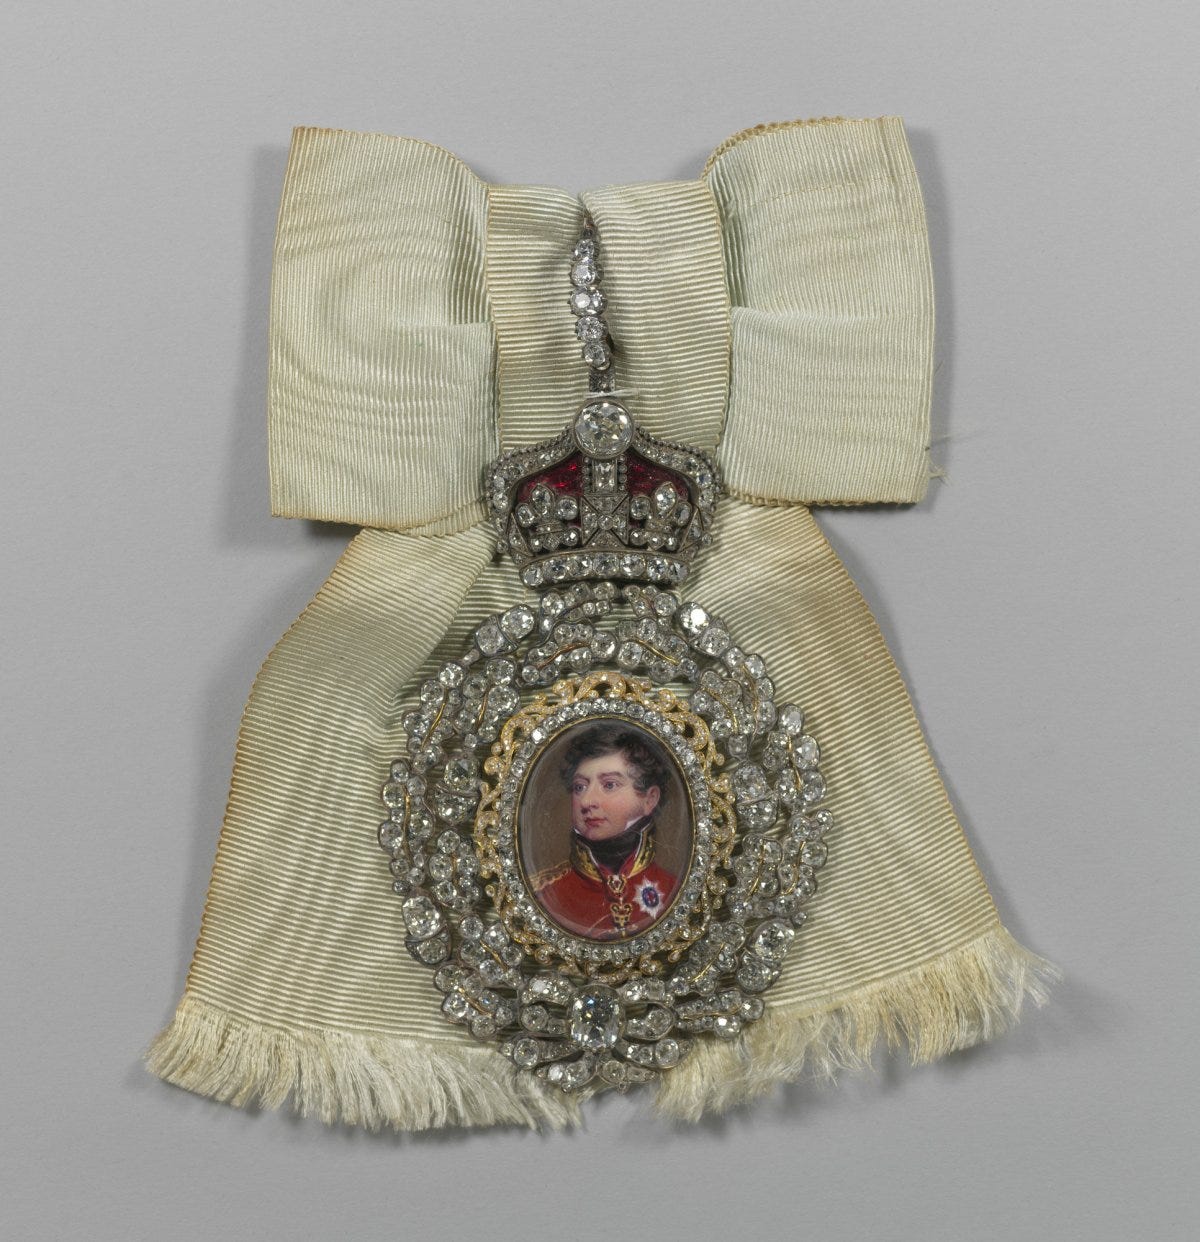 Royal Family Order of King George IV